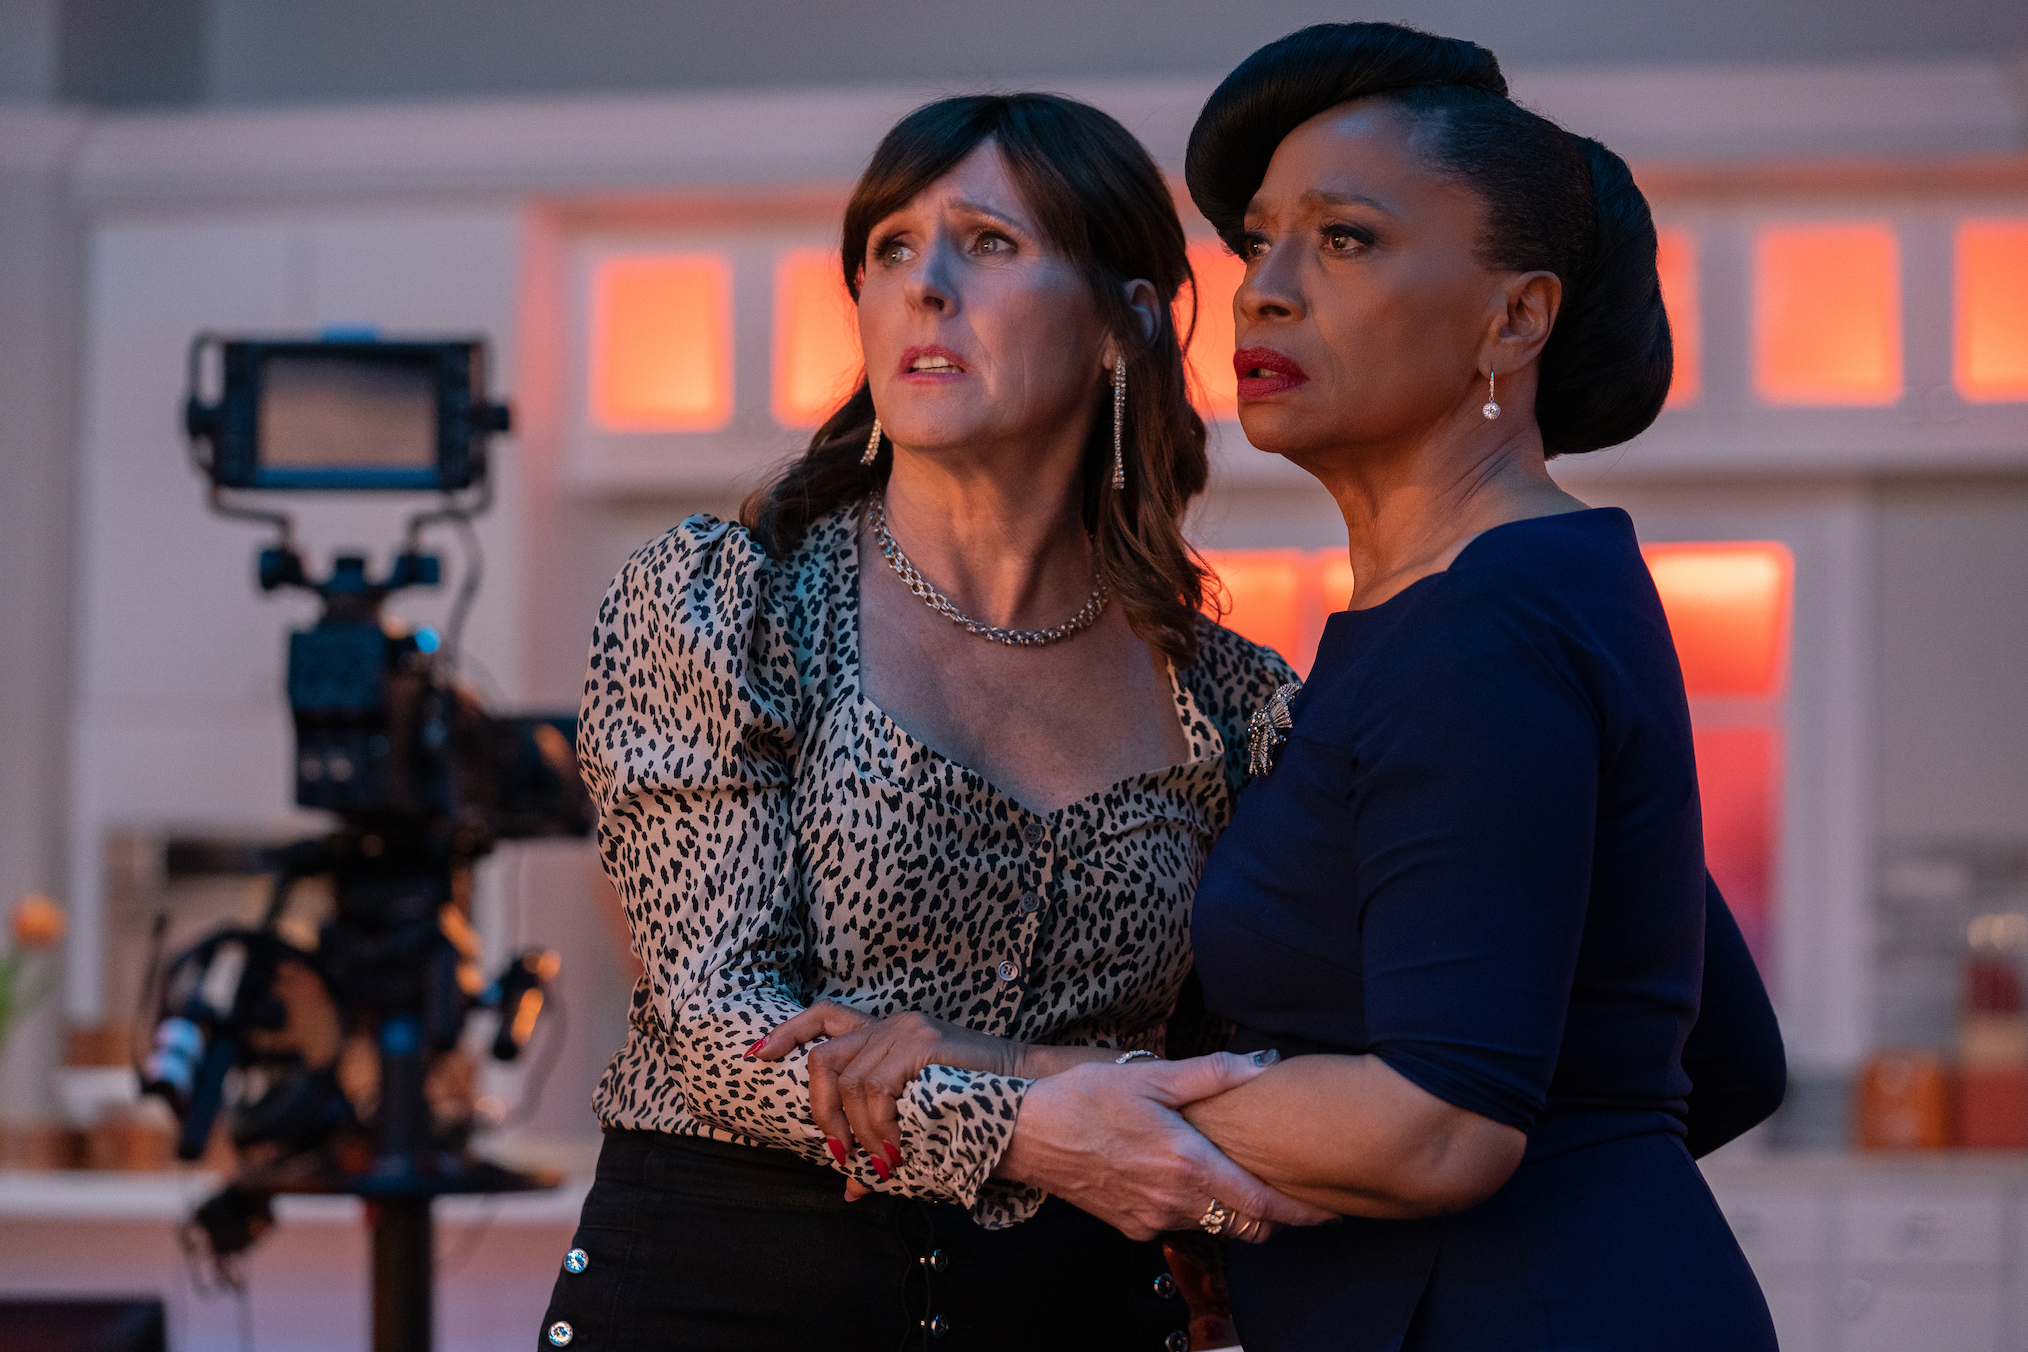 Molly Shannon as Jackie Stilton and Jenifer Lewis as Patricia Kunken in I LOVE THAT FOR YOU Episode 8